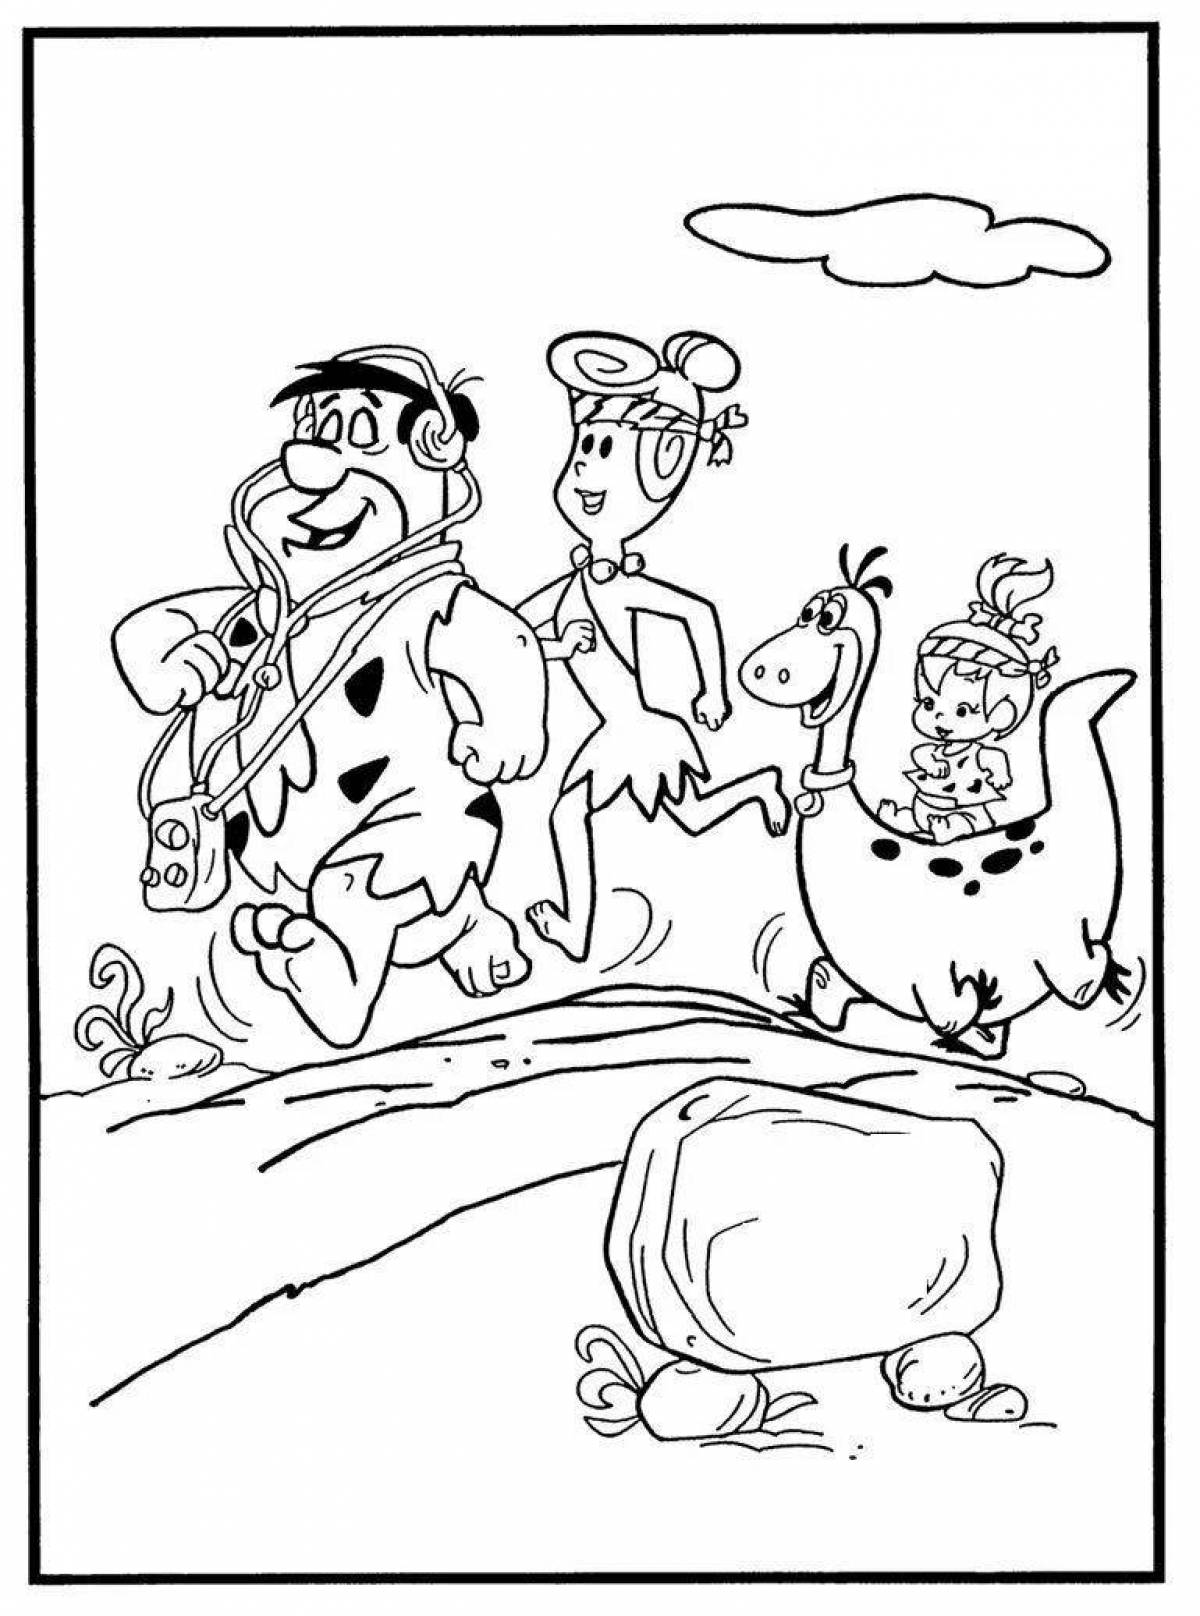 Fred flintstone live coloring page